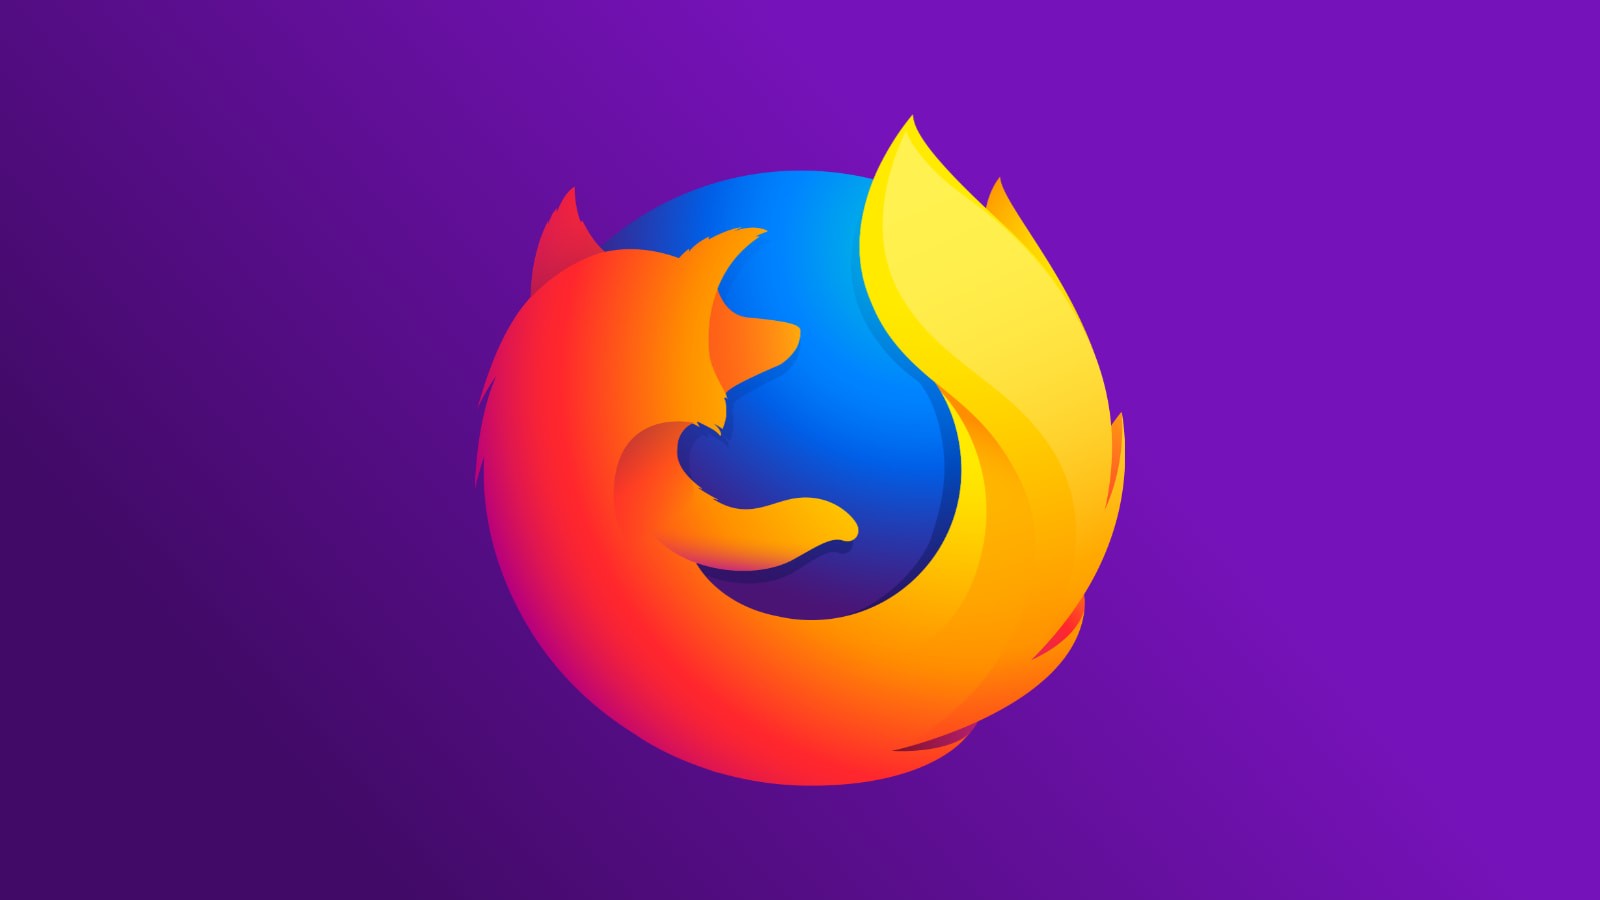 download mozilla firefox for mac 10.8.5